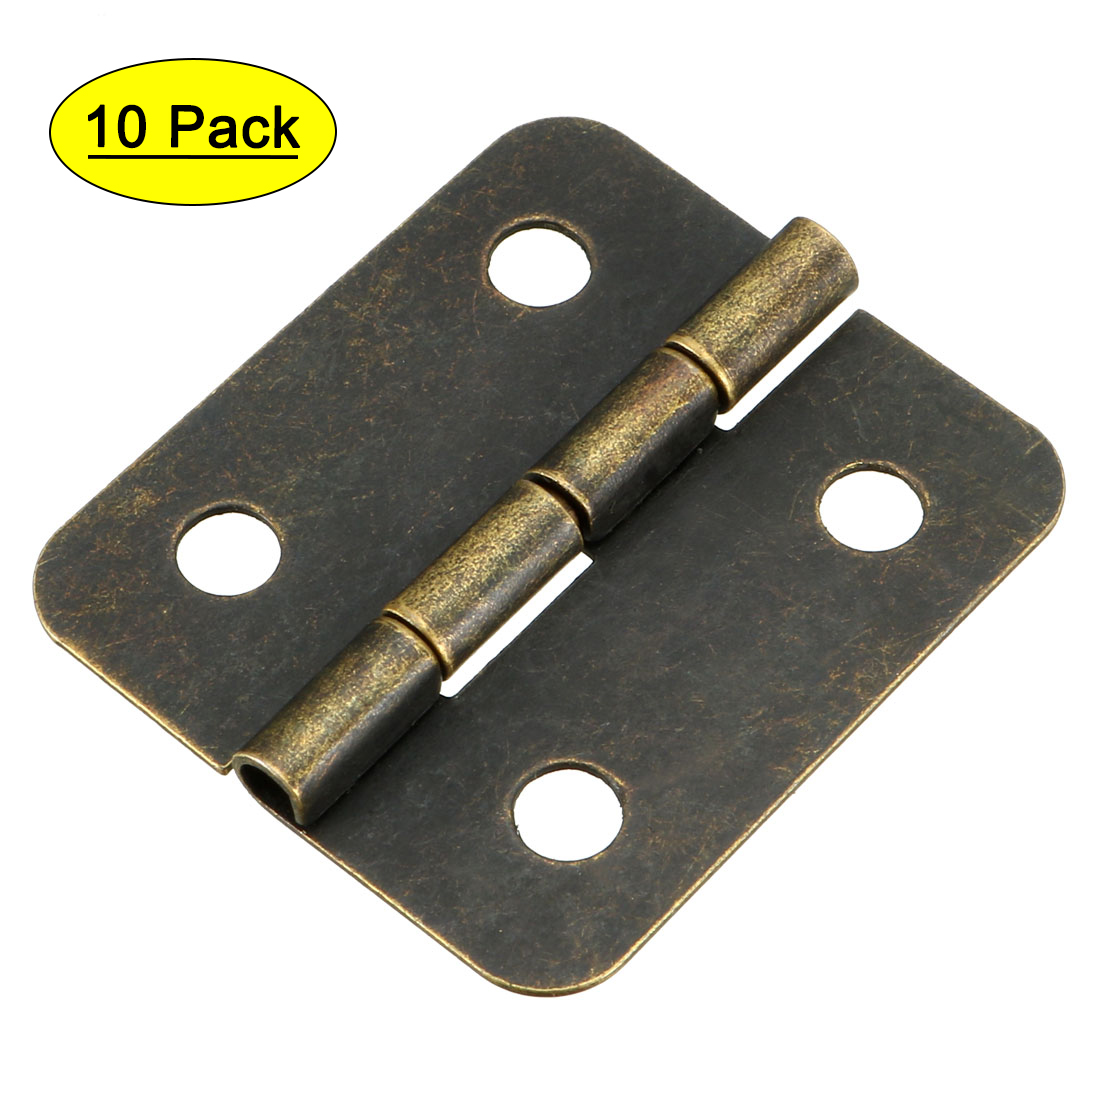 Uxcell 1.18" Antique Bronze  Hinges Retro  Hinge Replacement with Screws 10pcs - image 1 of 5